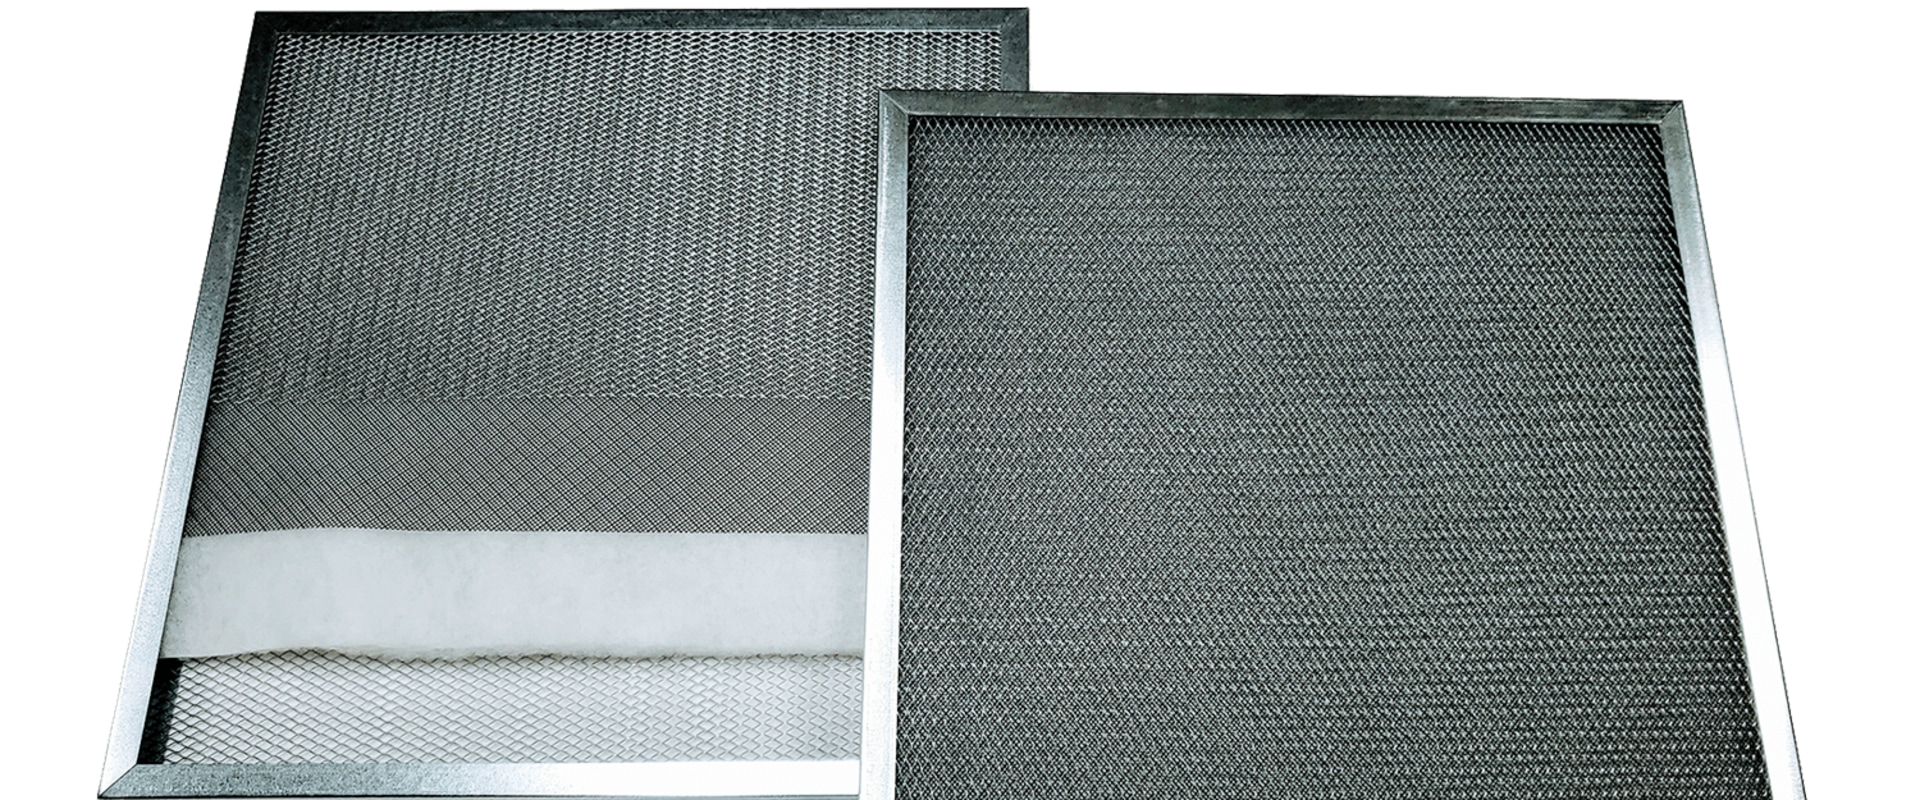 The Benefits of Using Washable Air Filters